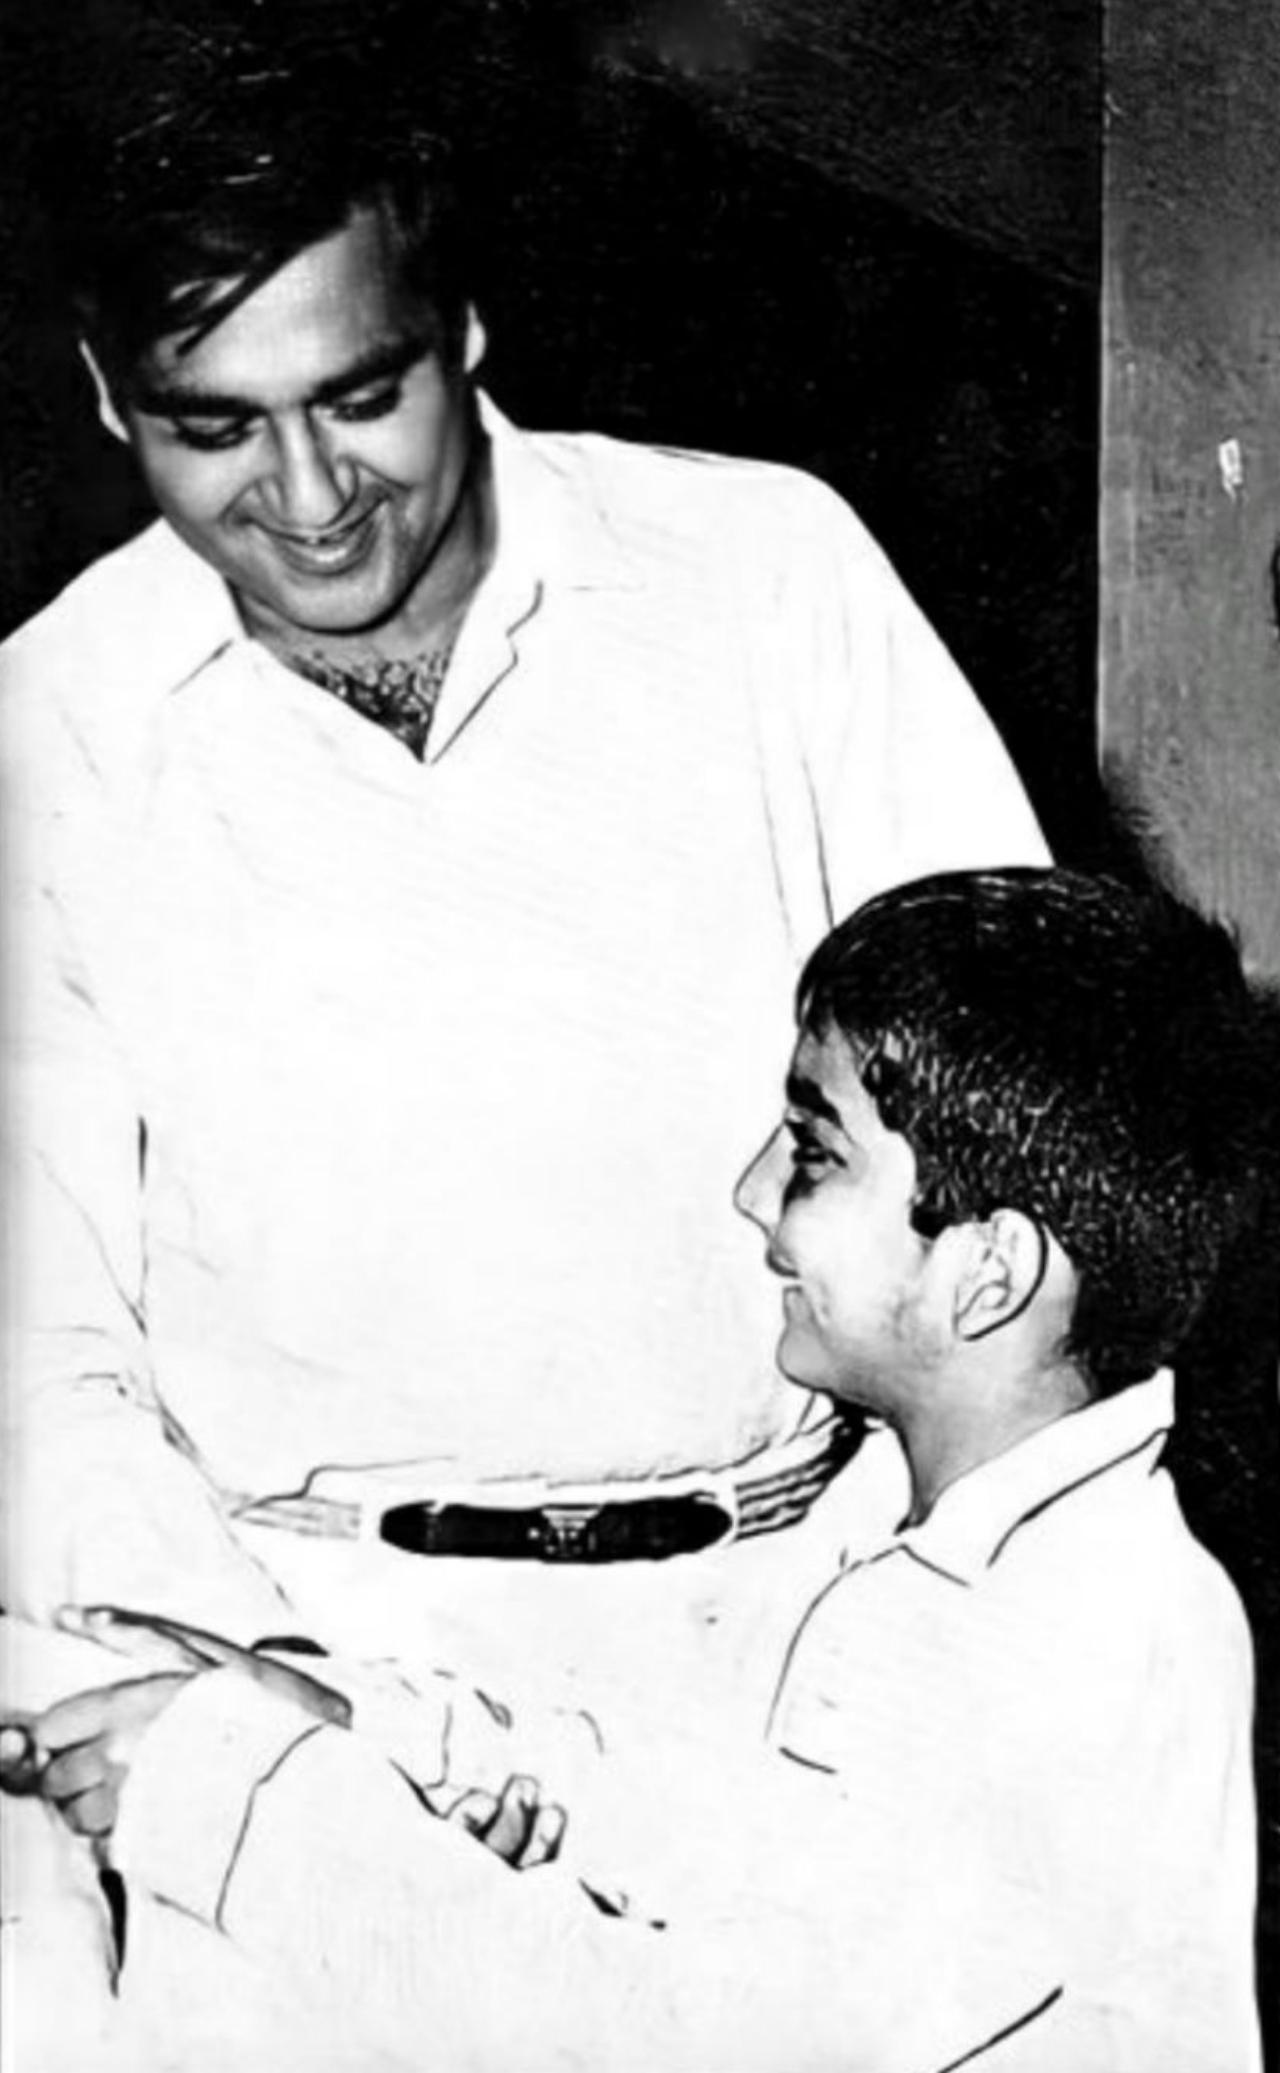 Sunil Dutt was one of Hindi cinema's major stars in the 1950s and 1960s. During this time he starred in several successful films including, Sadhna (1958), Sujata (1959), Mujhe Jeene Do (1963), Khandan (1965) and Padosan (1967). Padosan saw him share the screen with stalwart Kishore Kumar and Saira Banu. The songs Meri Saamne Wali Khidki and Ek Chatur Naar were chartbusters.Sunil Dutt continued to deliver hits in the 1970s. His most notable screen credits during this period include Heera (1973), Pran Jaye Par Vachan Na Jaye (1974), Nagin (1976) and Jaani Dushman (1979)